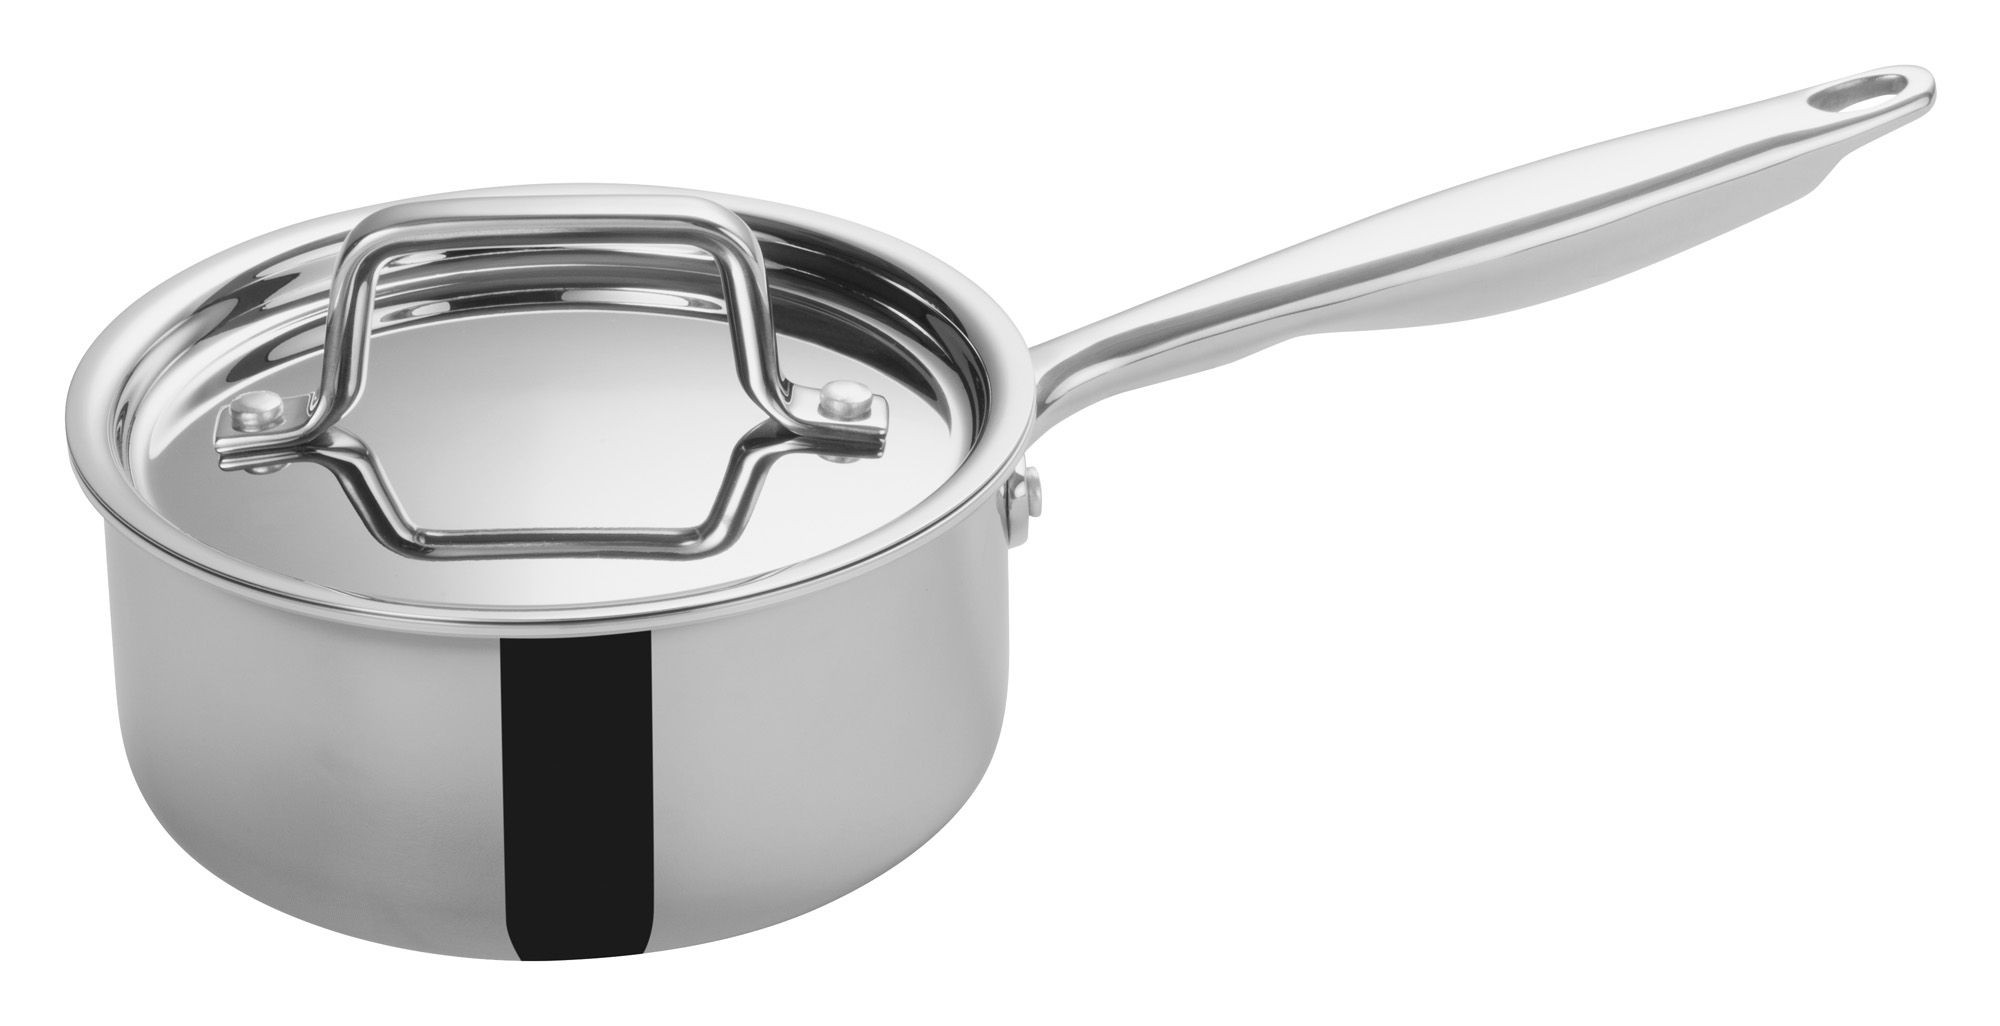 Winco TGAP-2 Tri-Ply Stainless Steel 1.5 Qt. Sauce Pan with Cover